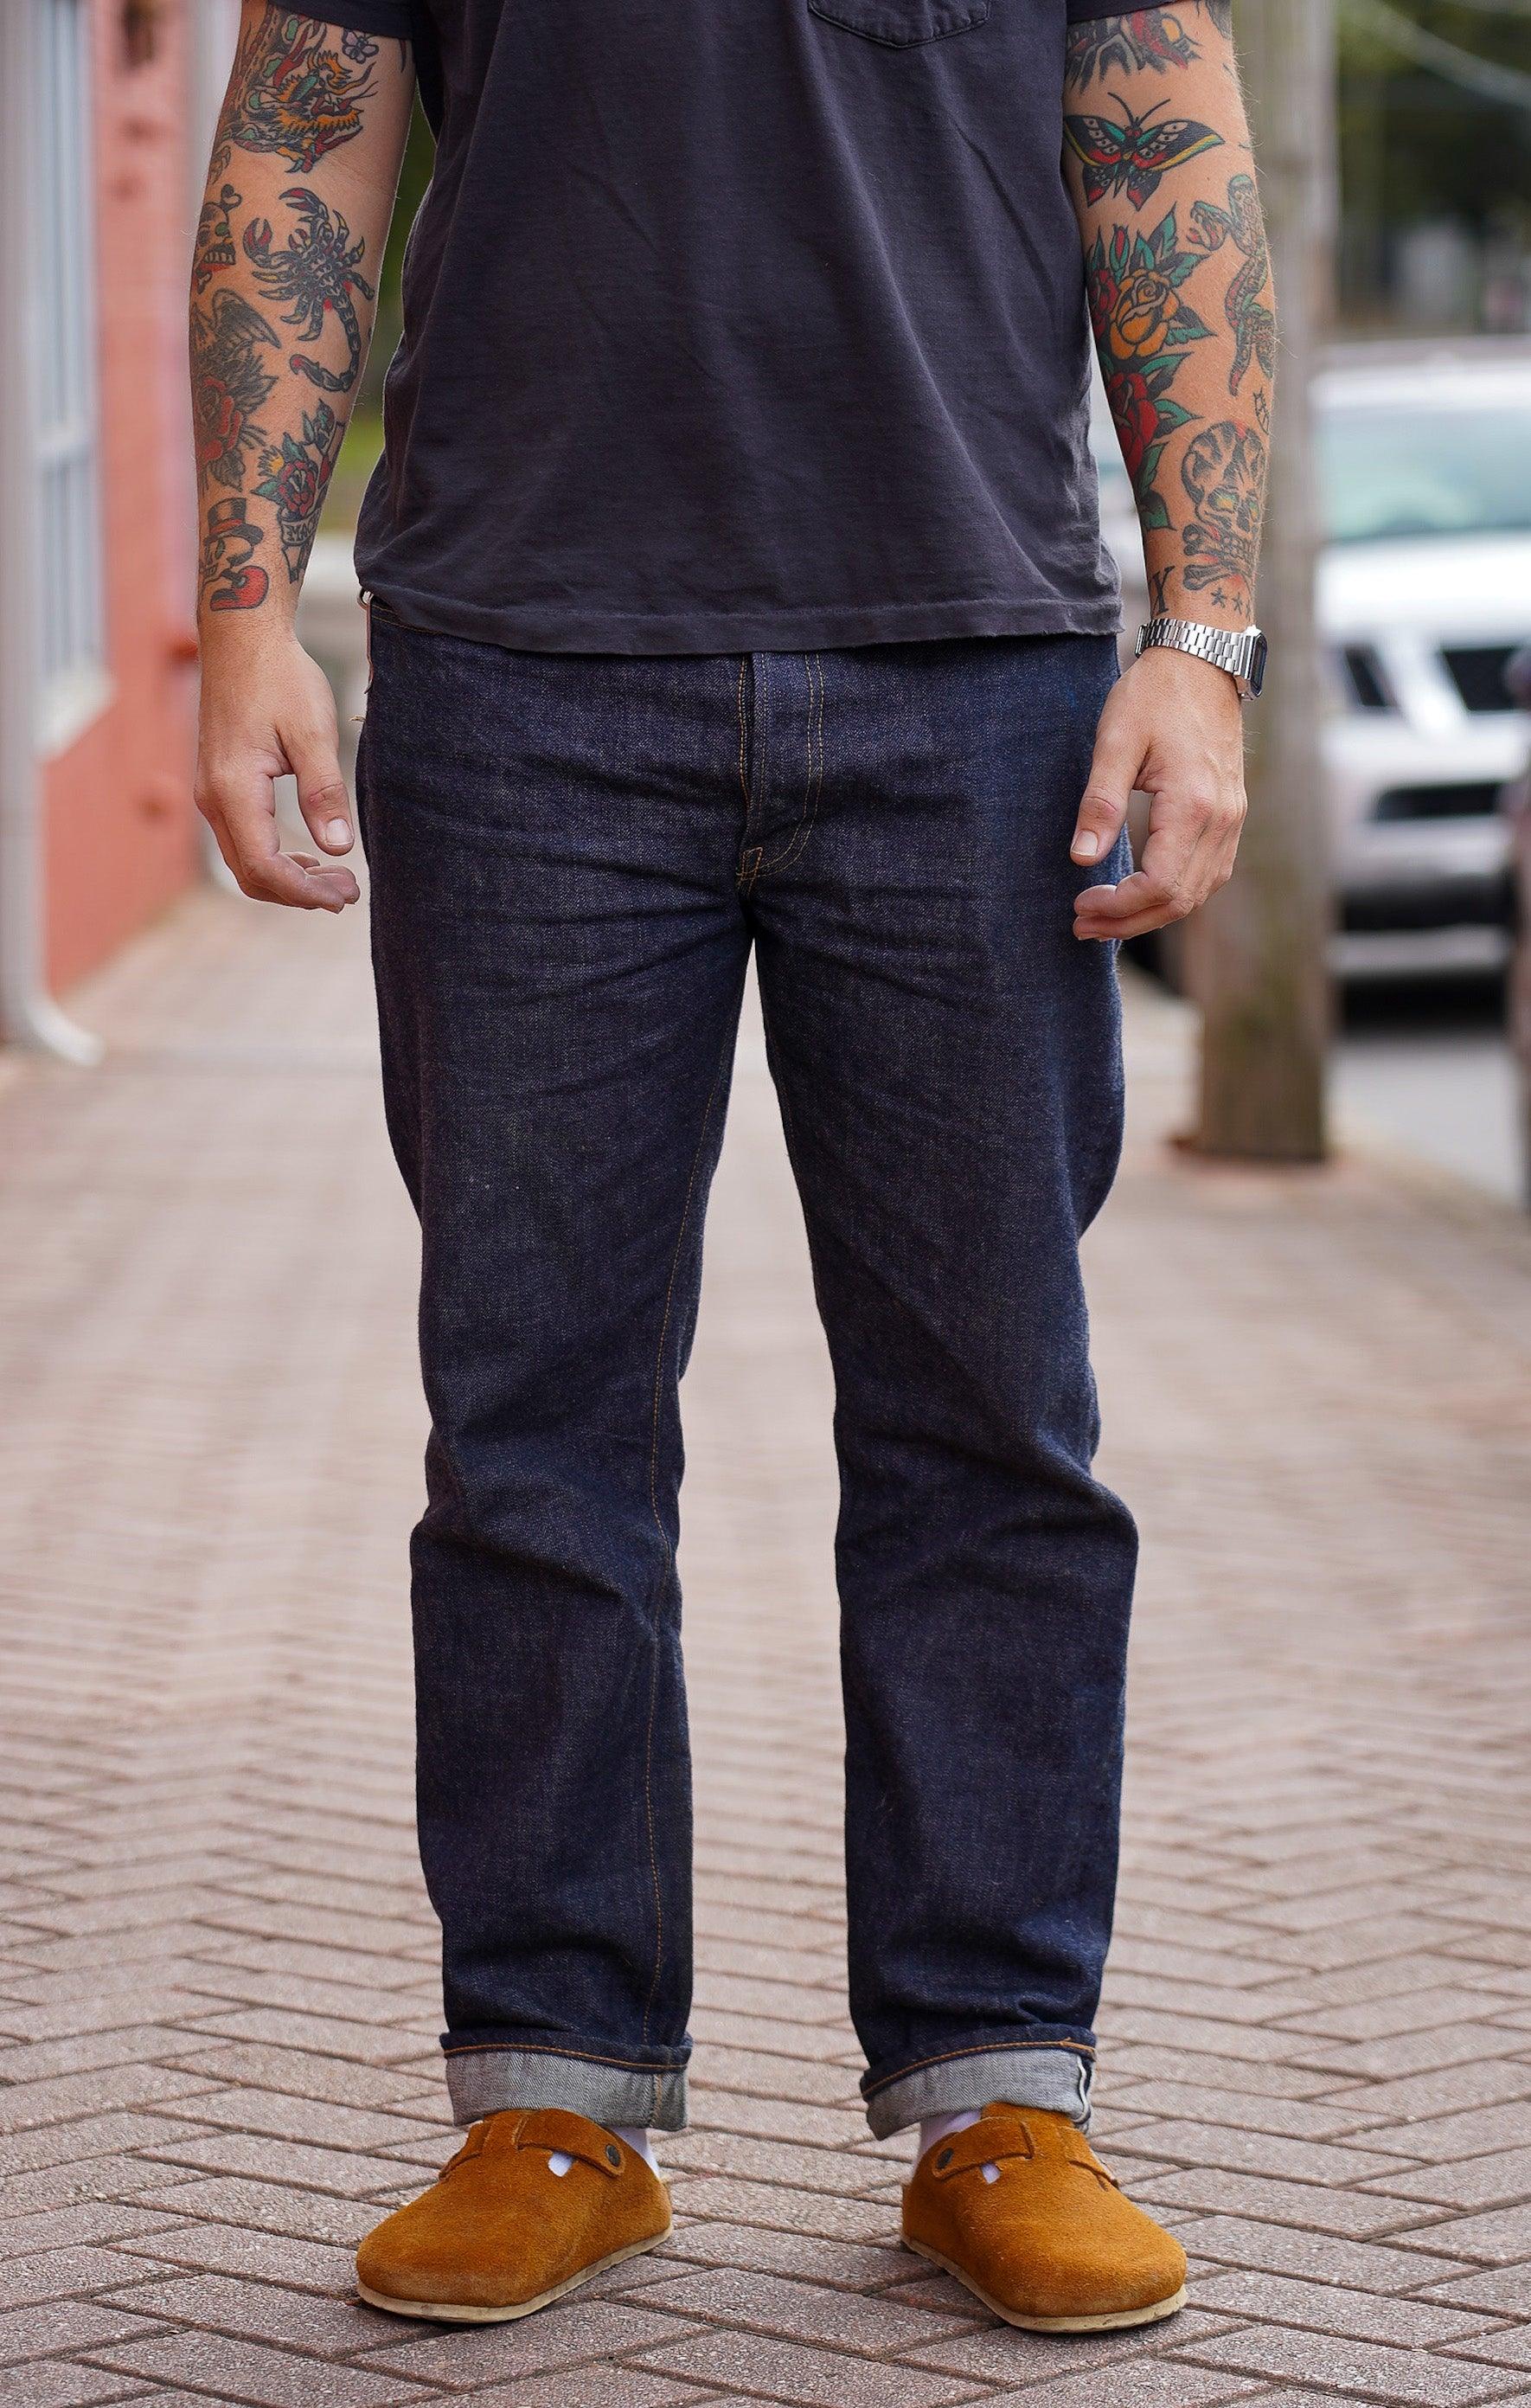 Fullcount & Co. 1103W - Clean Straight - 13.7oz - Guilty Party